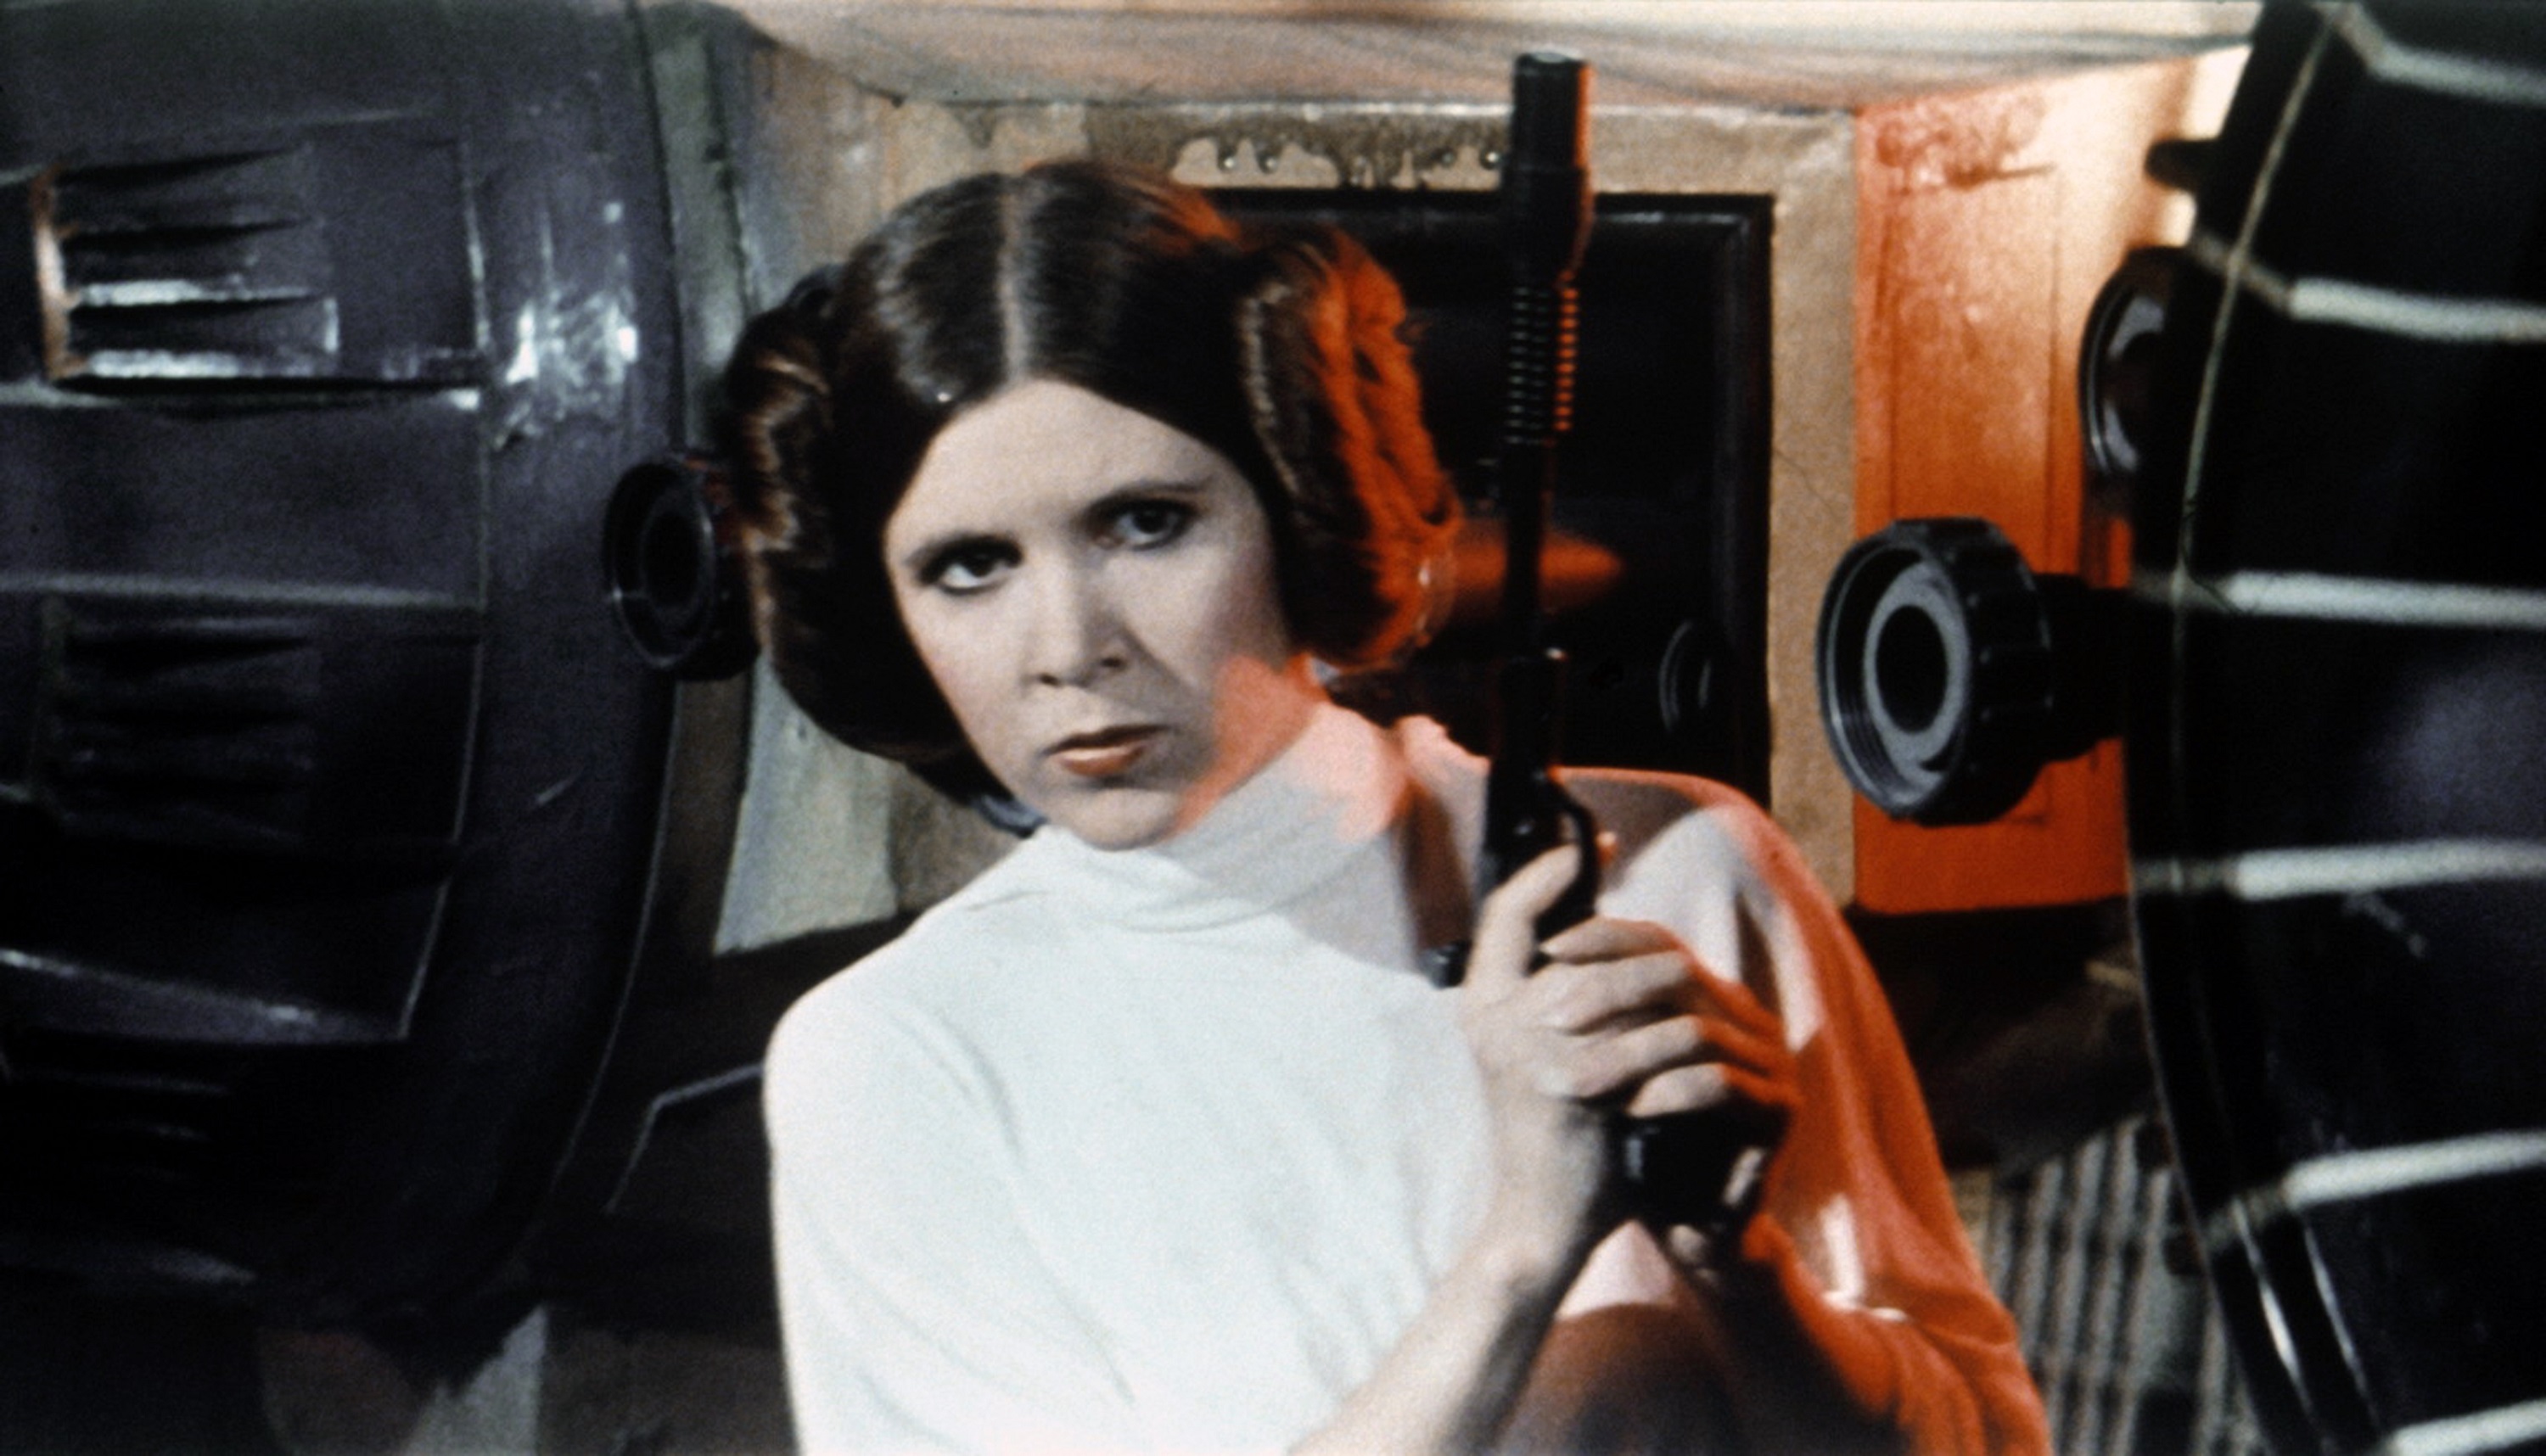 'Star Wars' actor Carrie Fisher